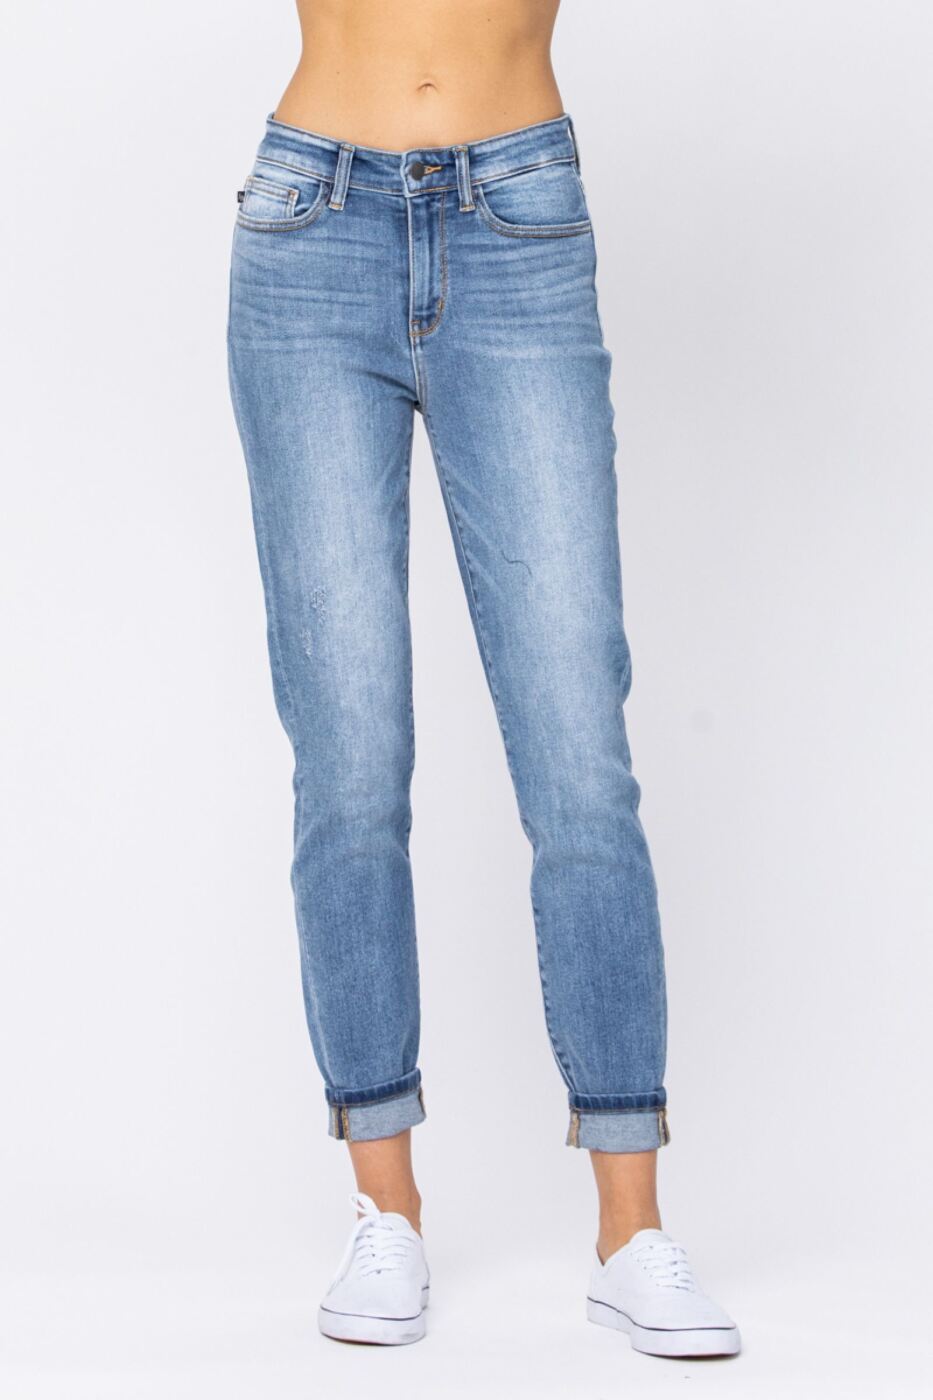 Judy Blue Double Cuff Slim Fit: FINAL CLEARANCE